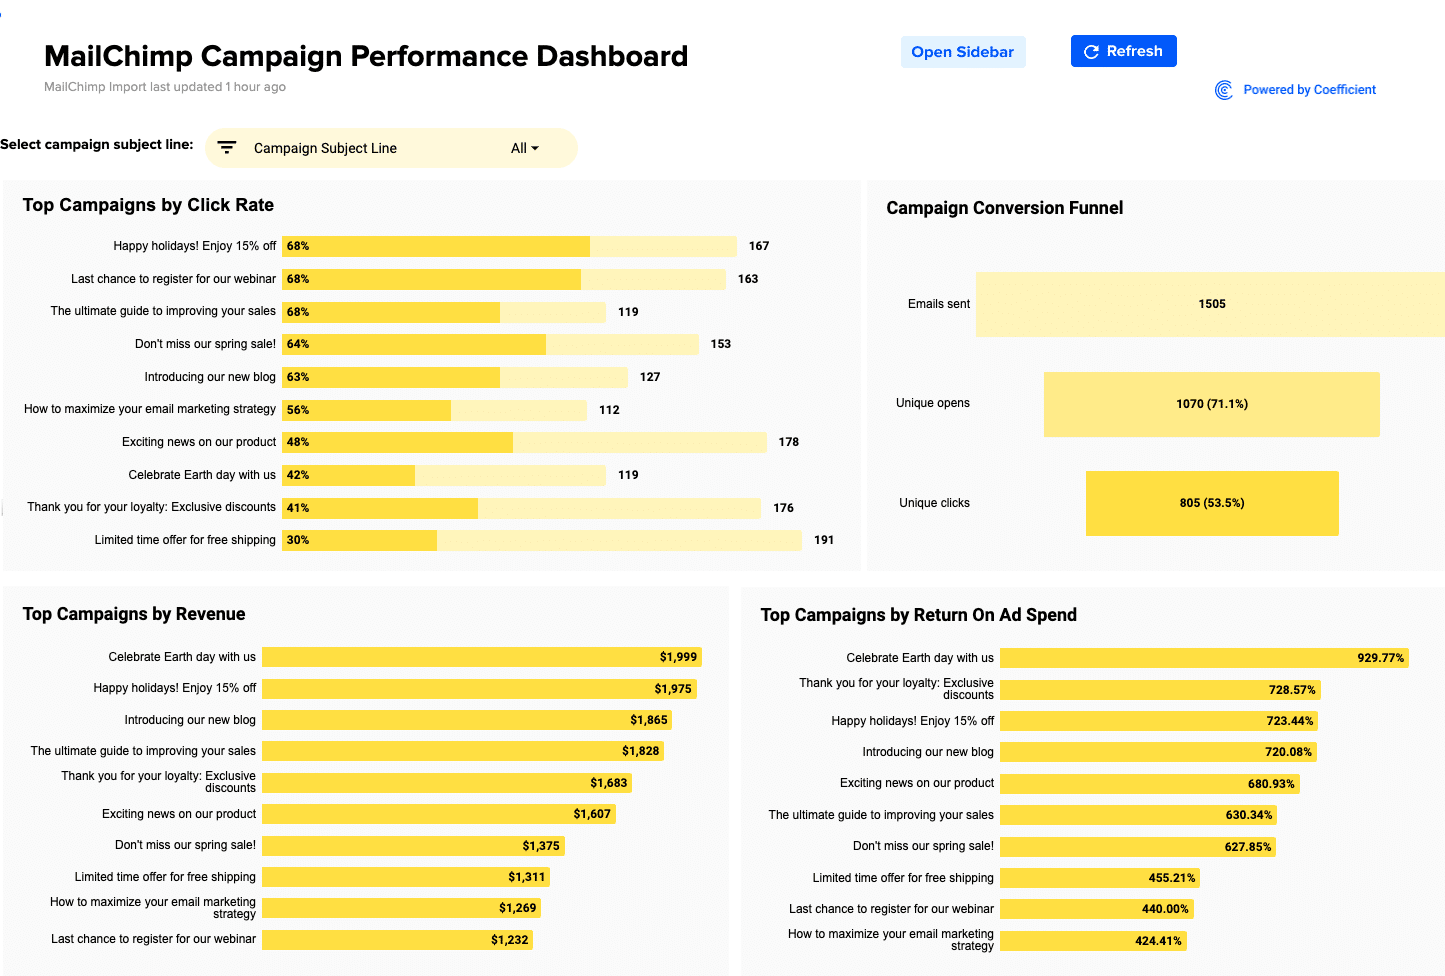 Coefficient’s Mailchimp Campaign Performance Dashboard gives marketers a holistic view of campaign performance segmented by audience.